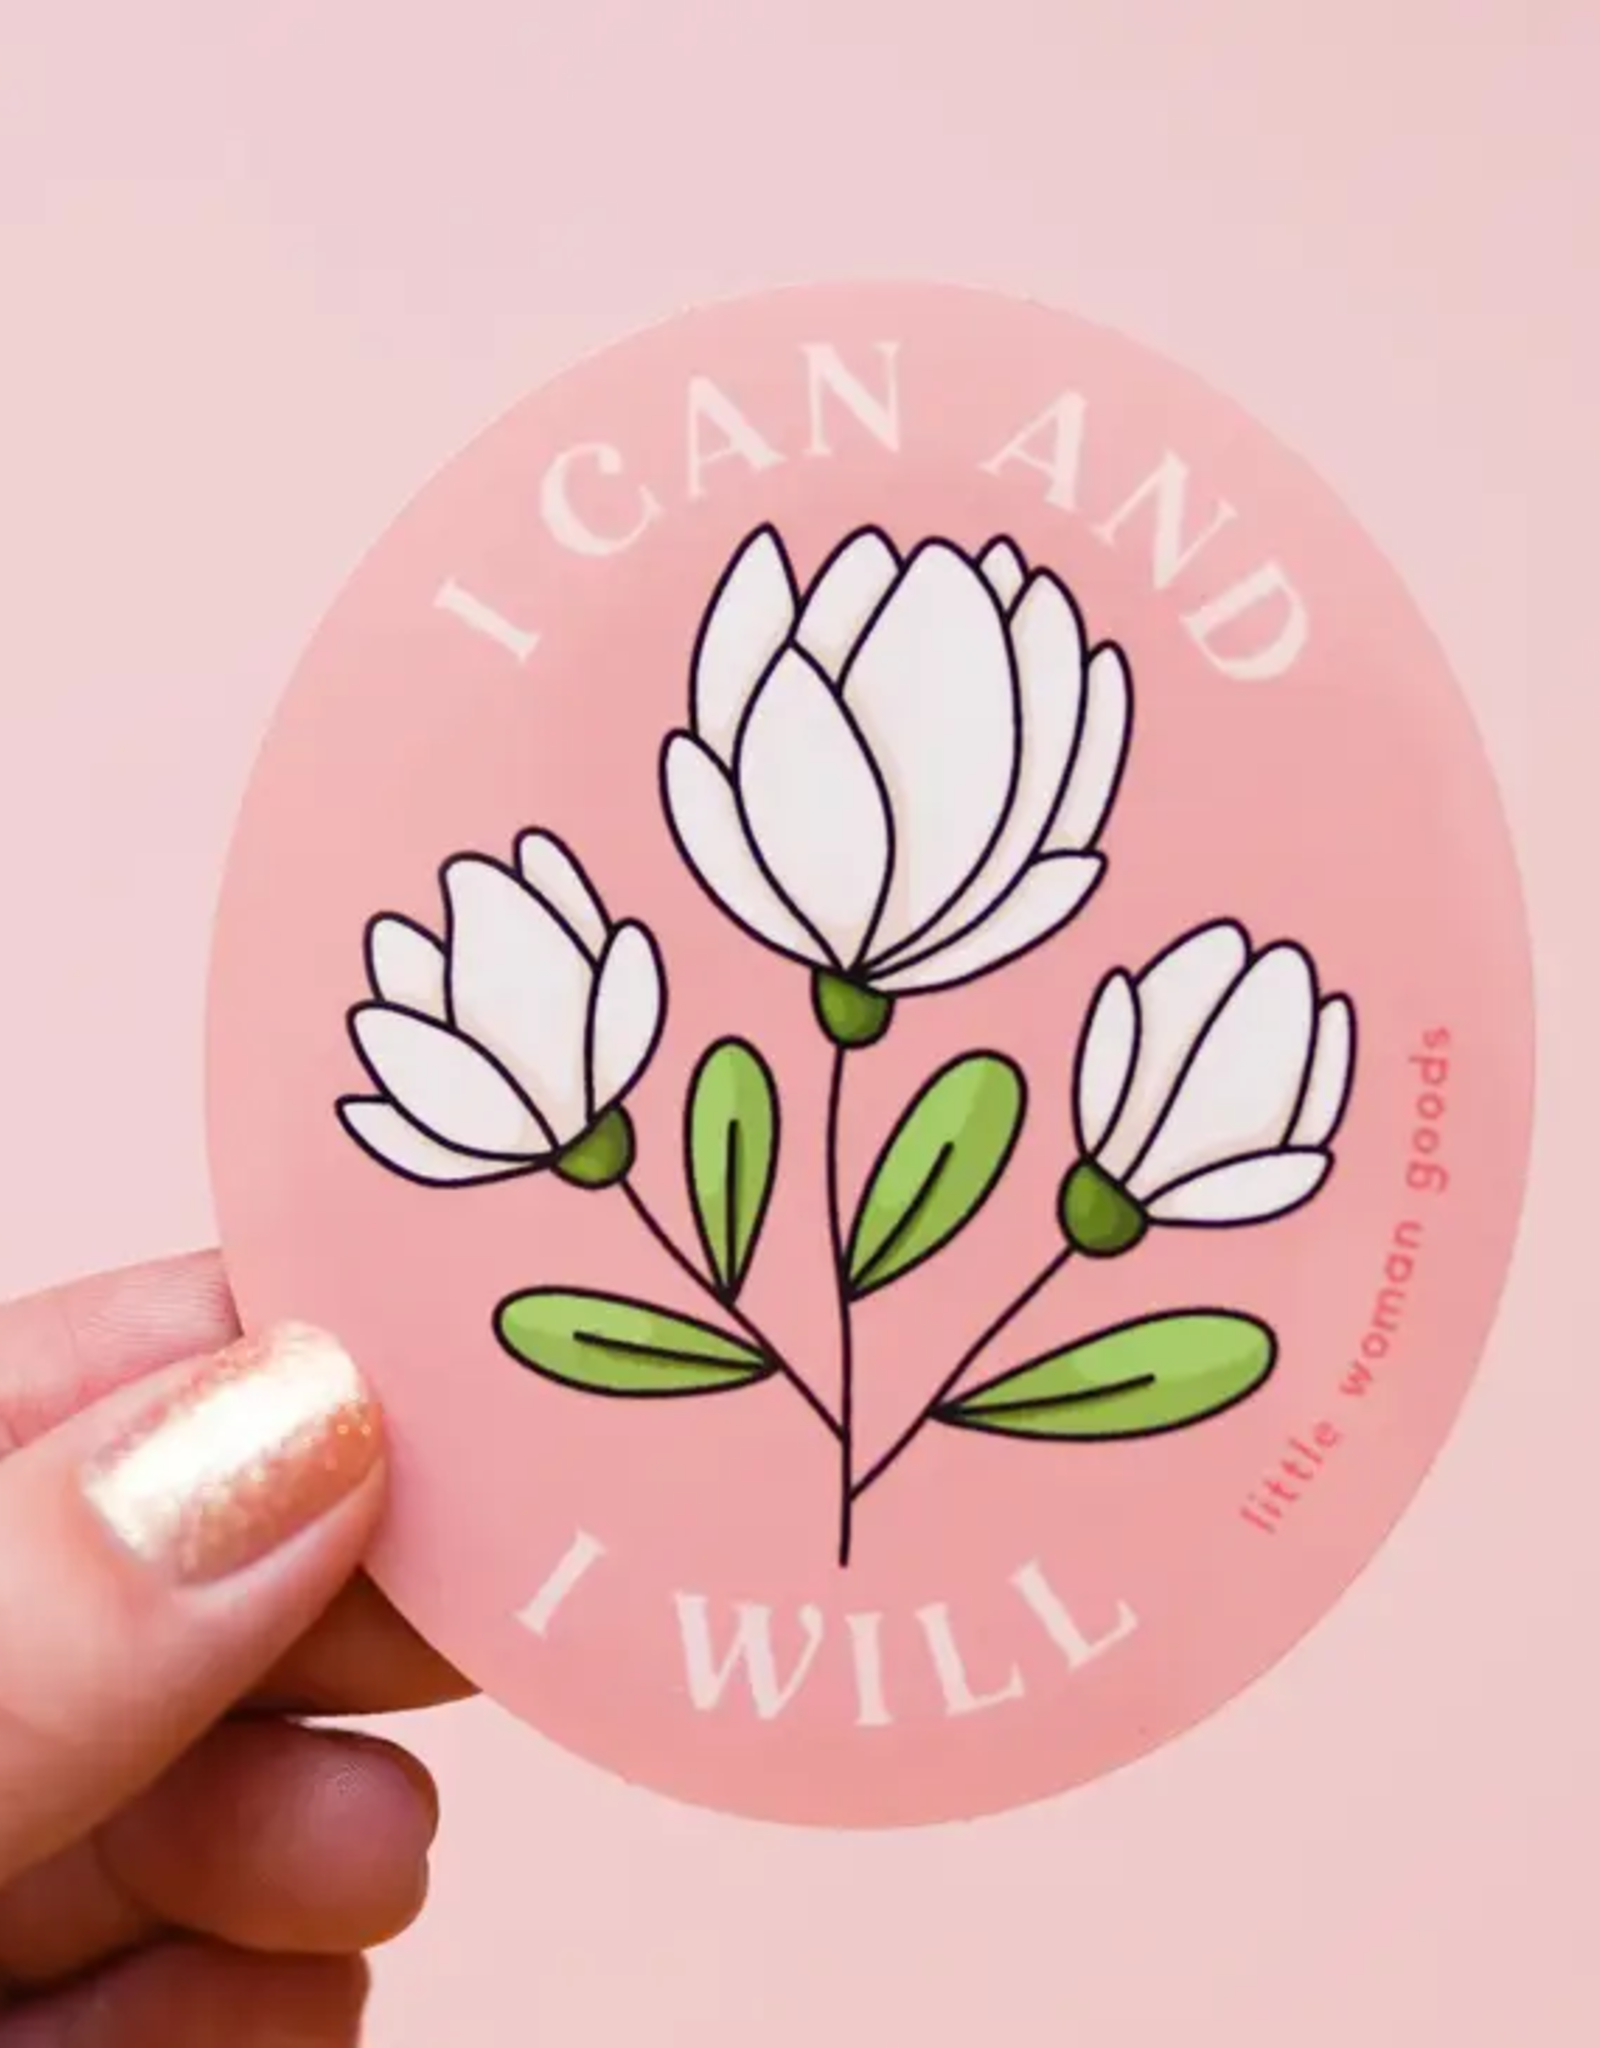 Little Woman Goods I Can & I Will Sticker